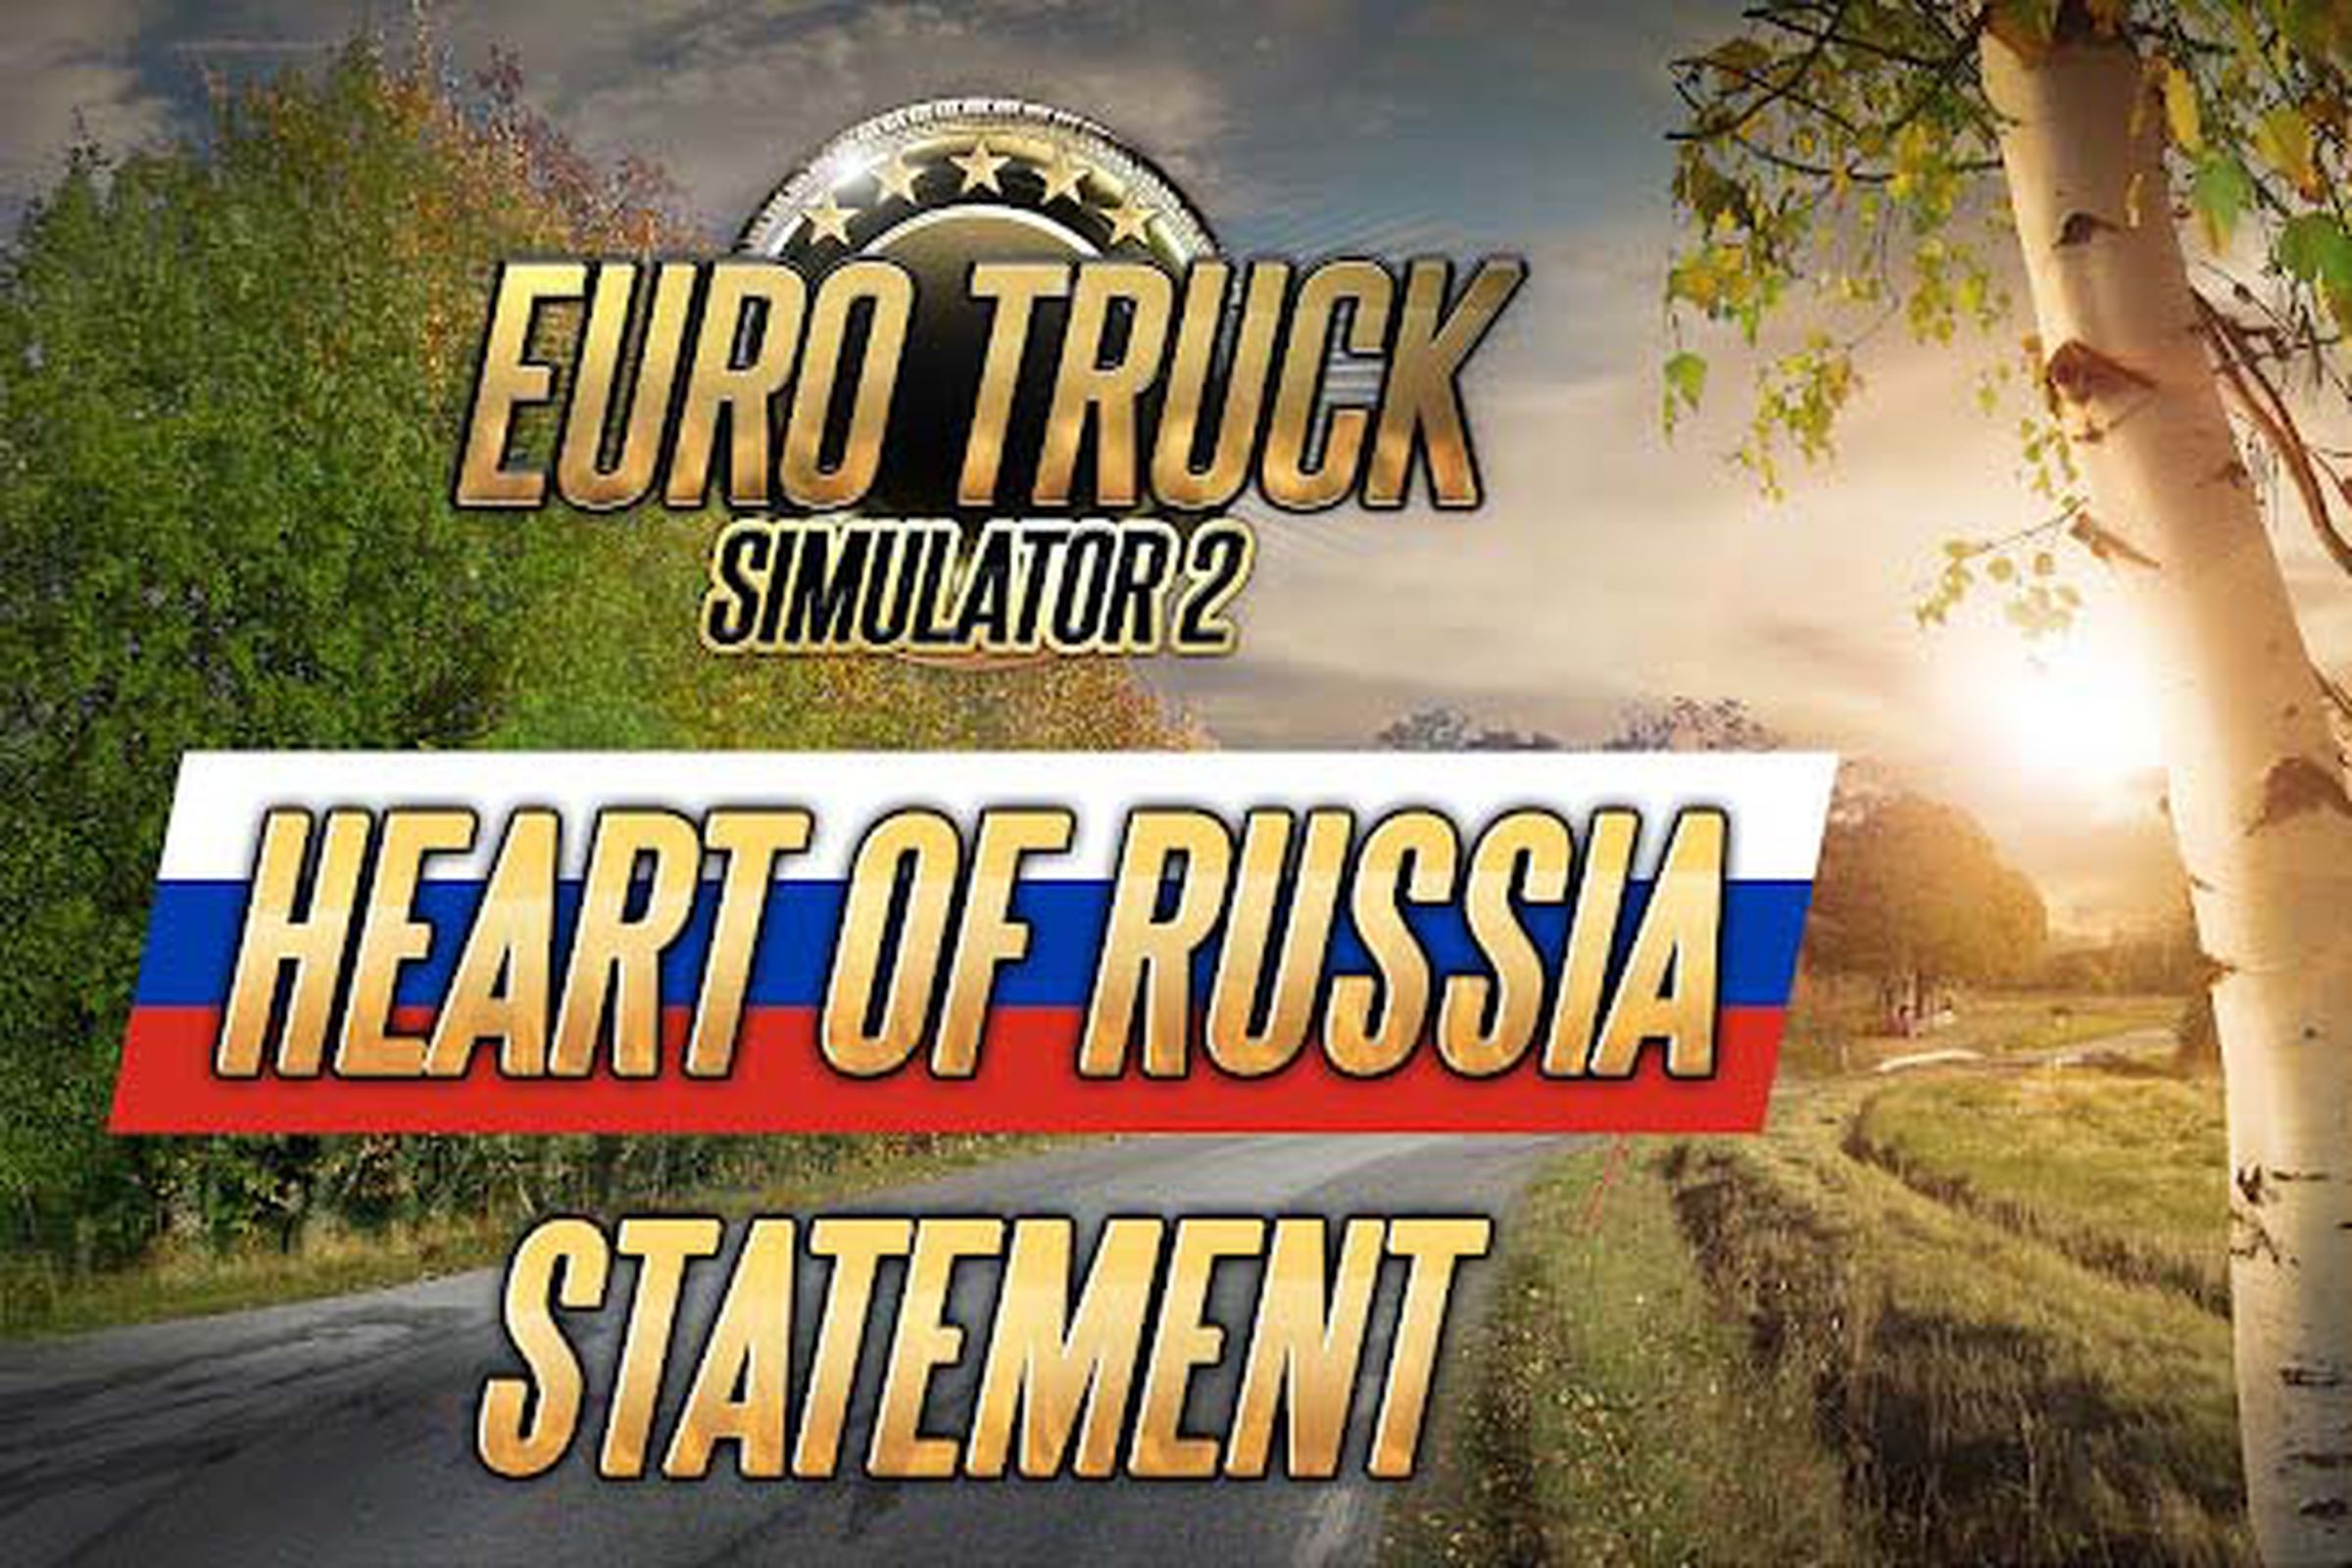 Heart of Russia was the game’s next planned DLC.